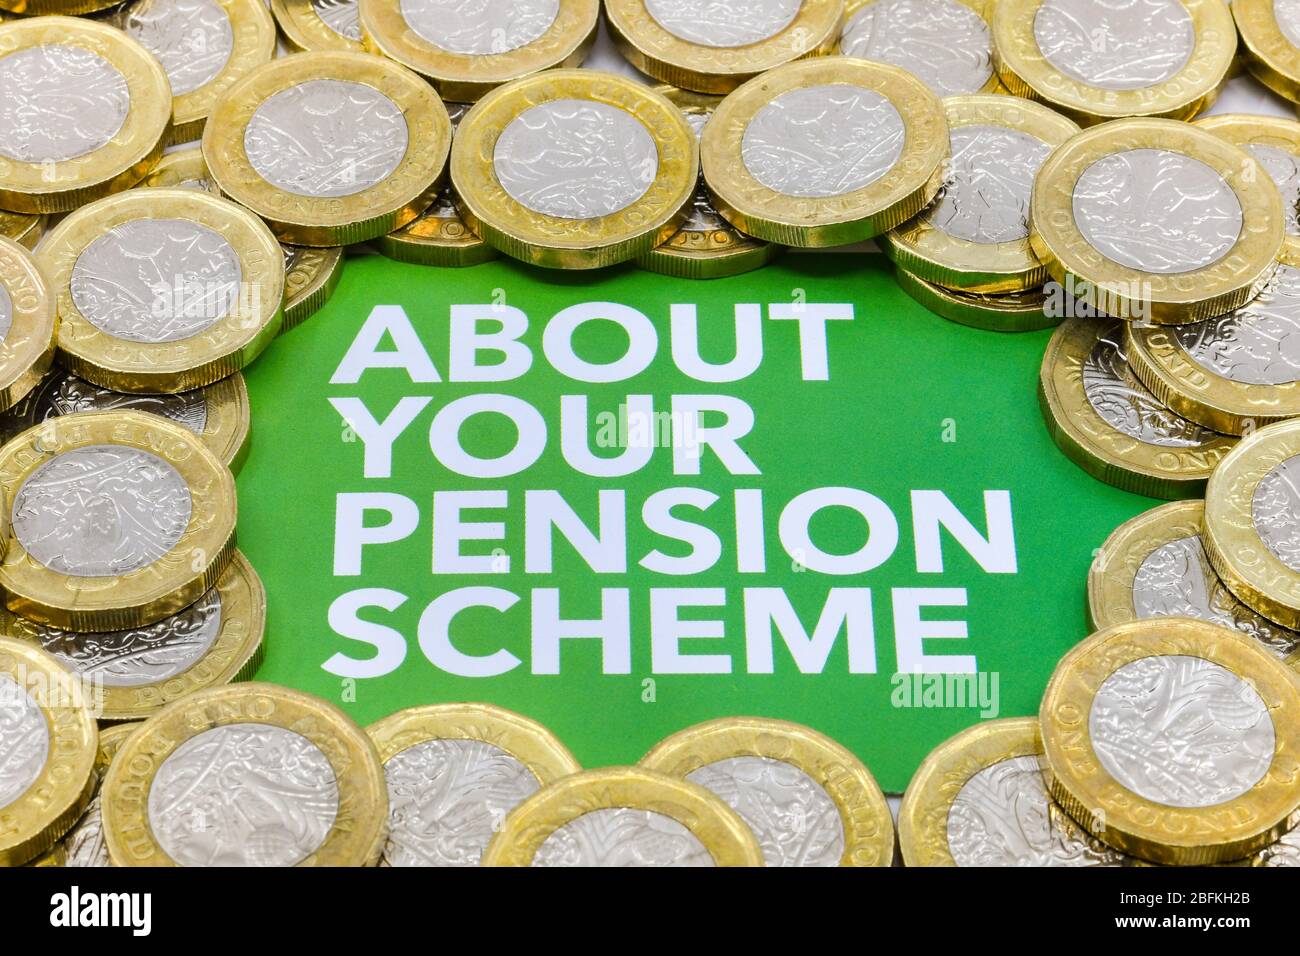 Top of a printed note with message 'About your pension scheme' surrounded by piles of British one pound coins Stock Photo